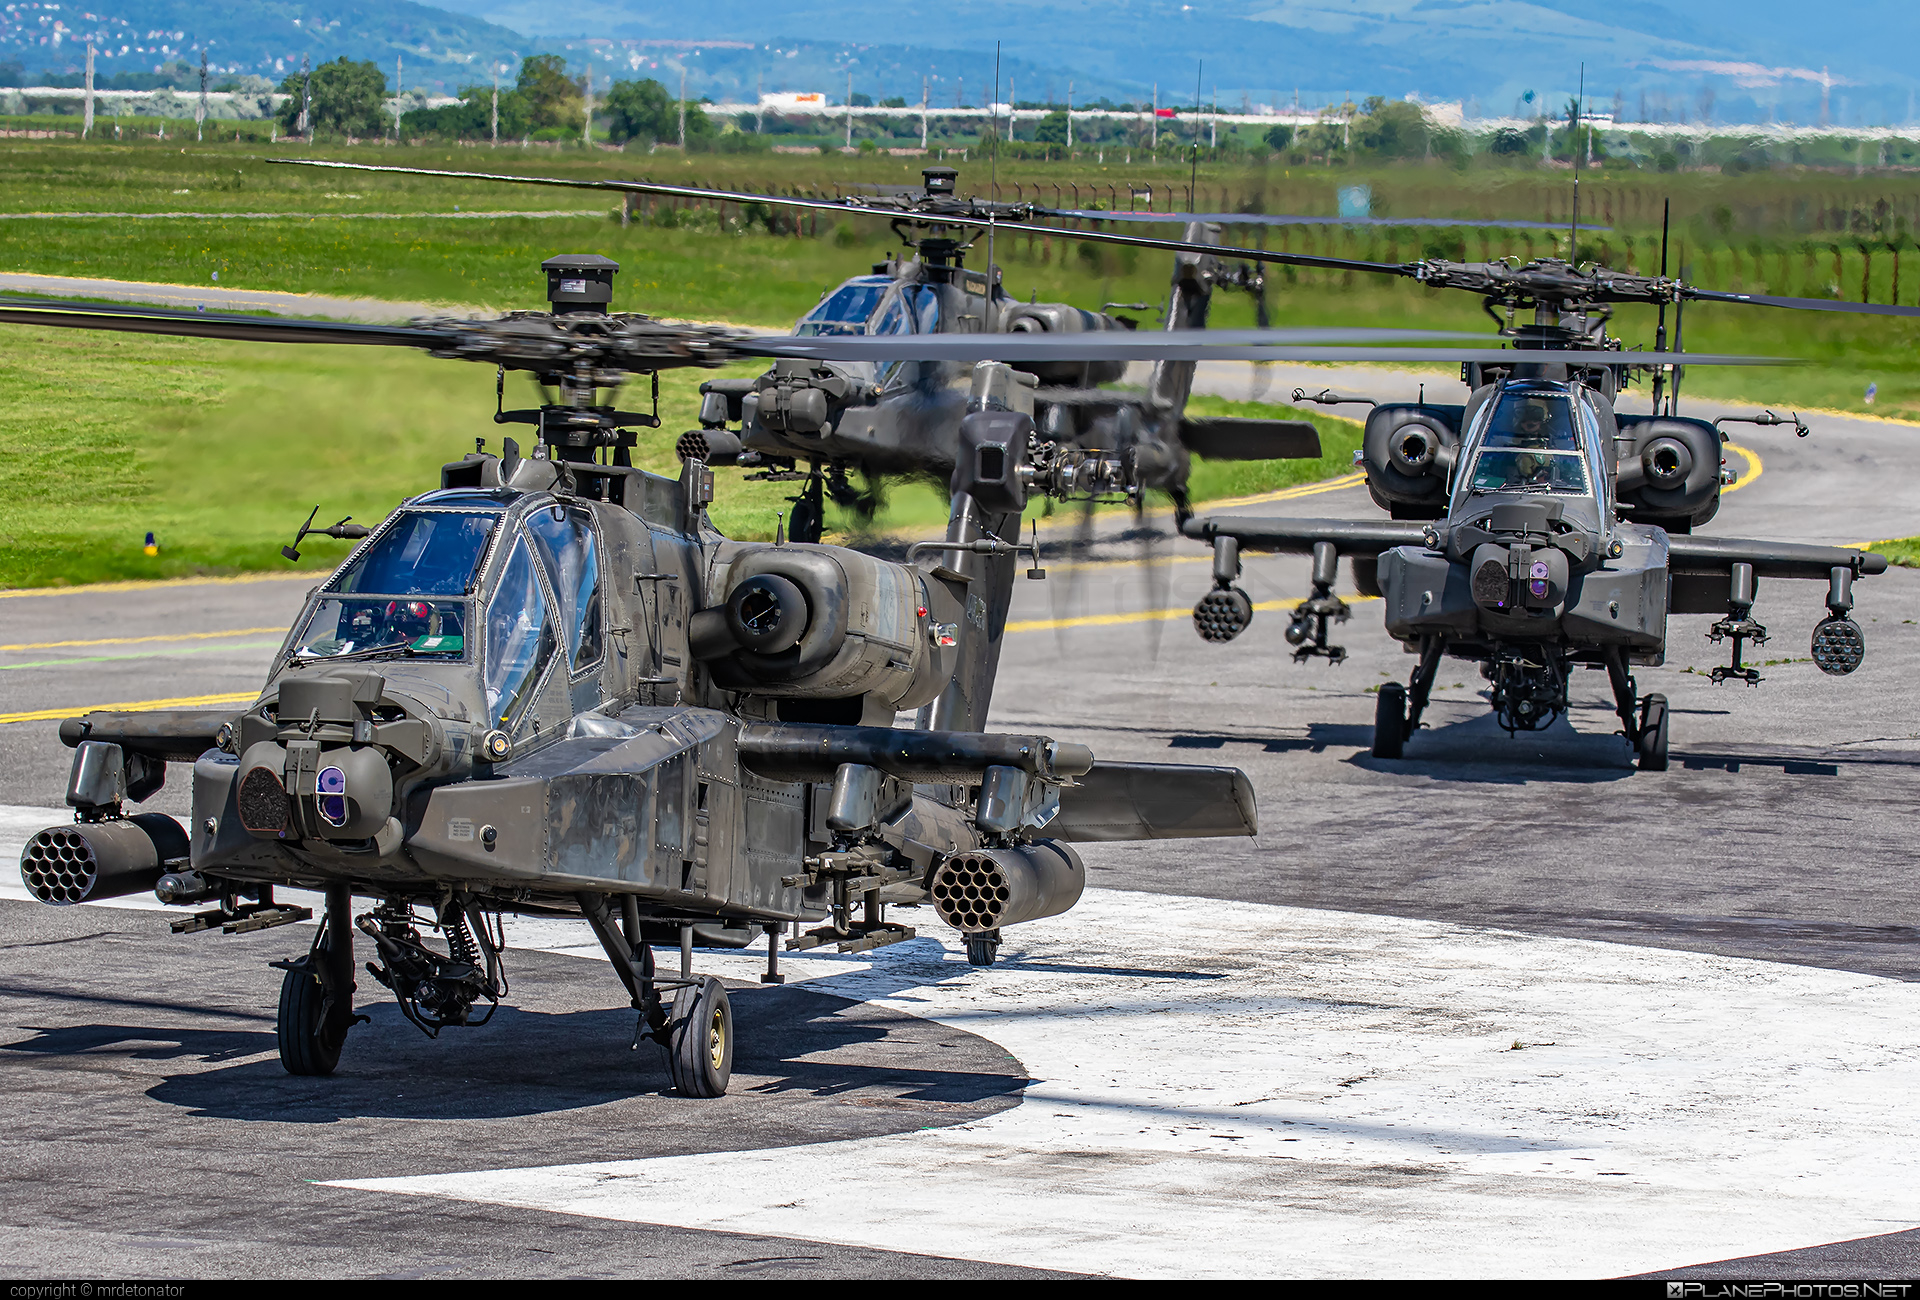 Boeing AH-64D Apache Longbow - 04-05453 operated by US Army #boeing #usarmy